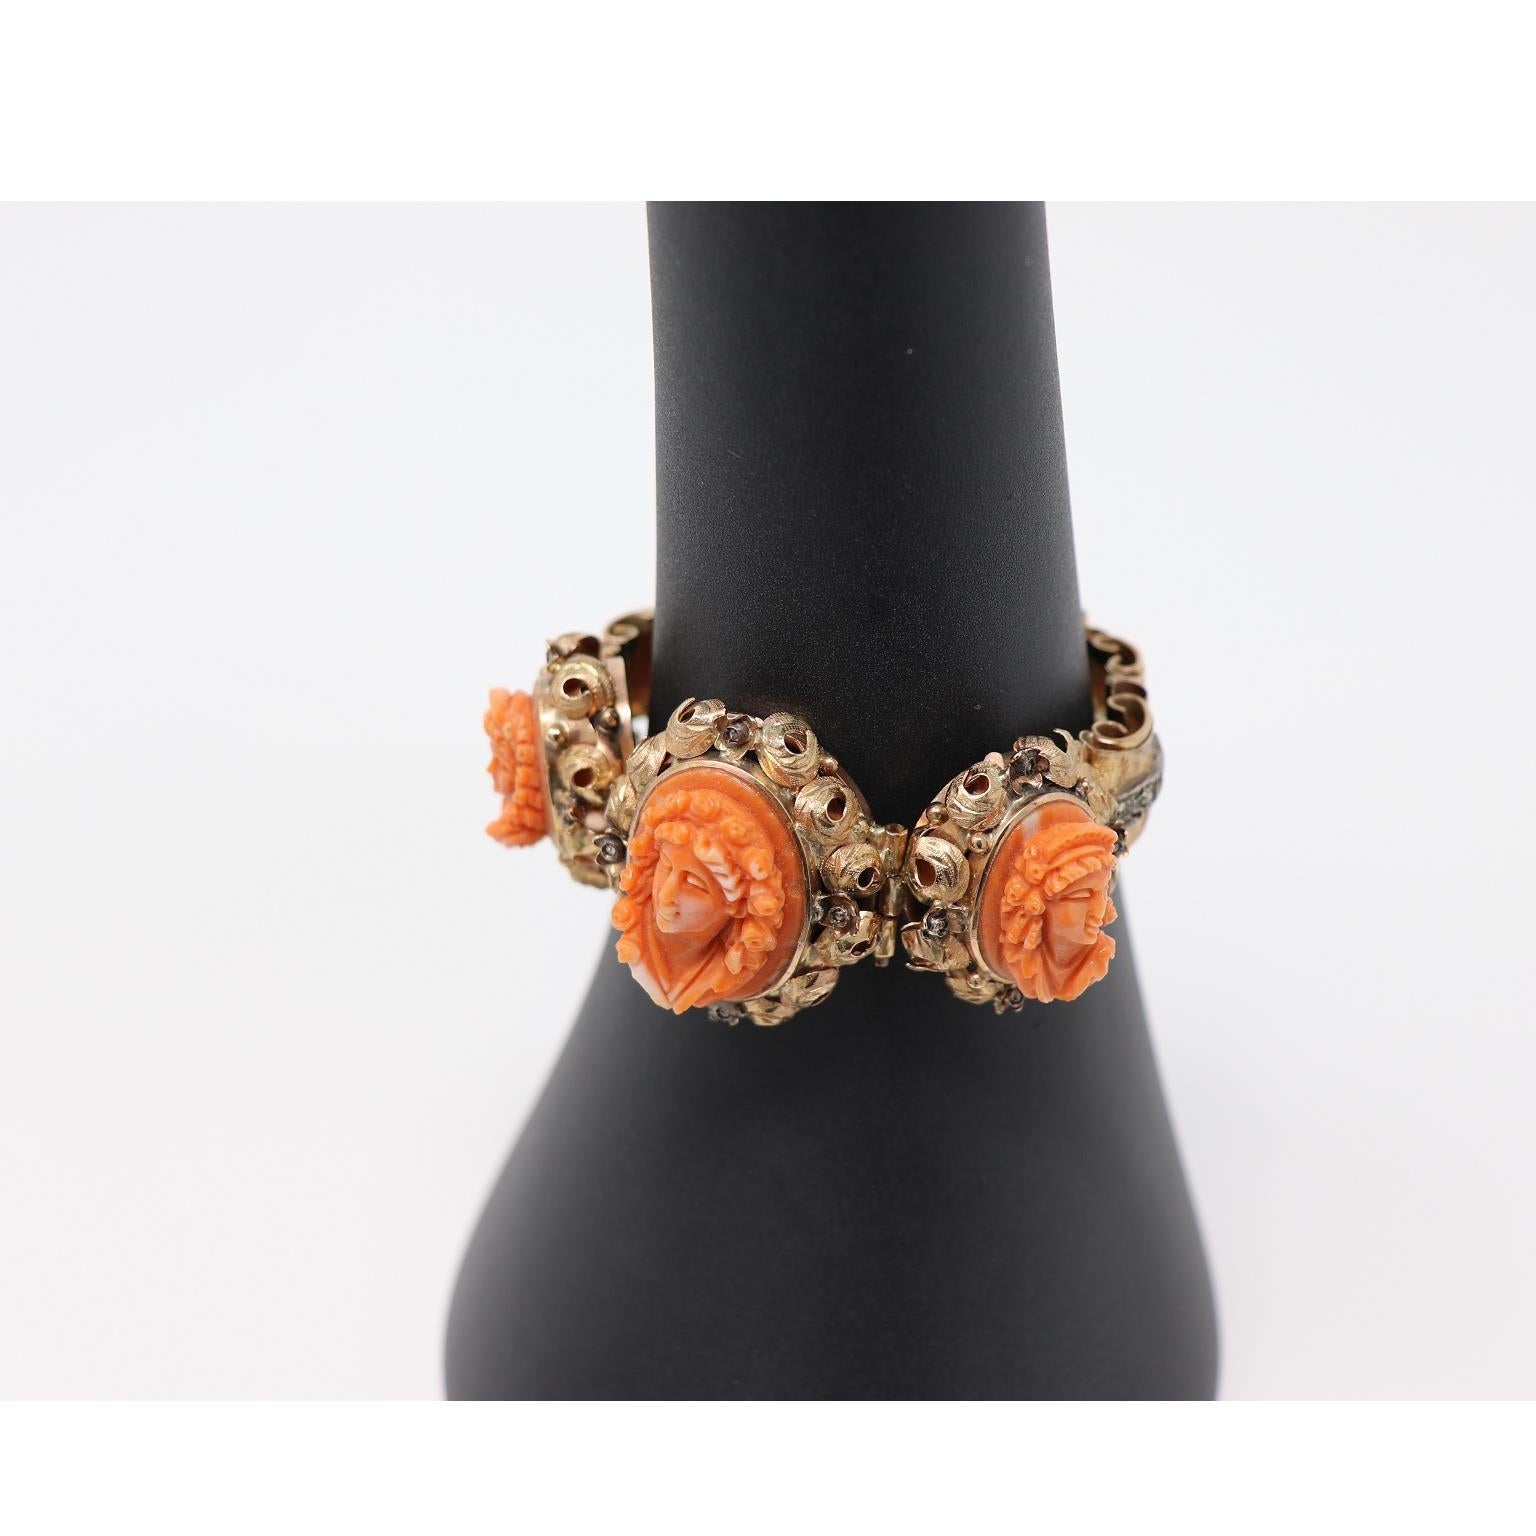 Rare beautiful antique bracelet in rose gold 375 with silver diamonds set with small diamonds. Gold is finely engraved by hand. The three large red coral cameos carved by hand in relief figures are of great value. High quality Italian goldsmith